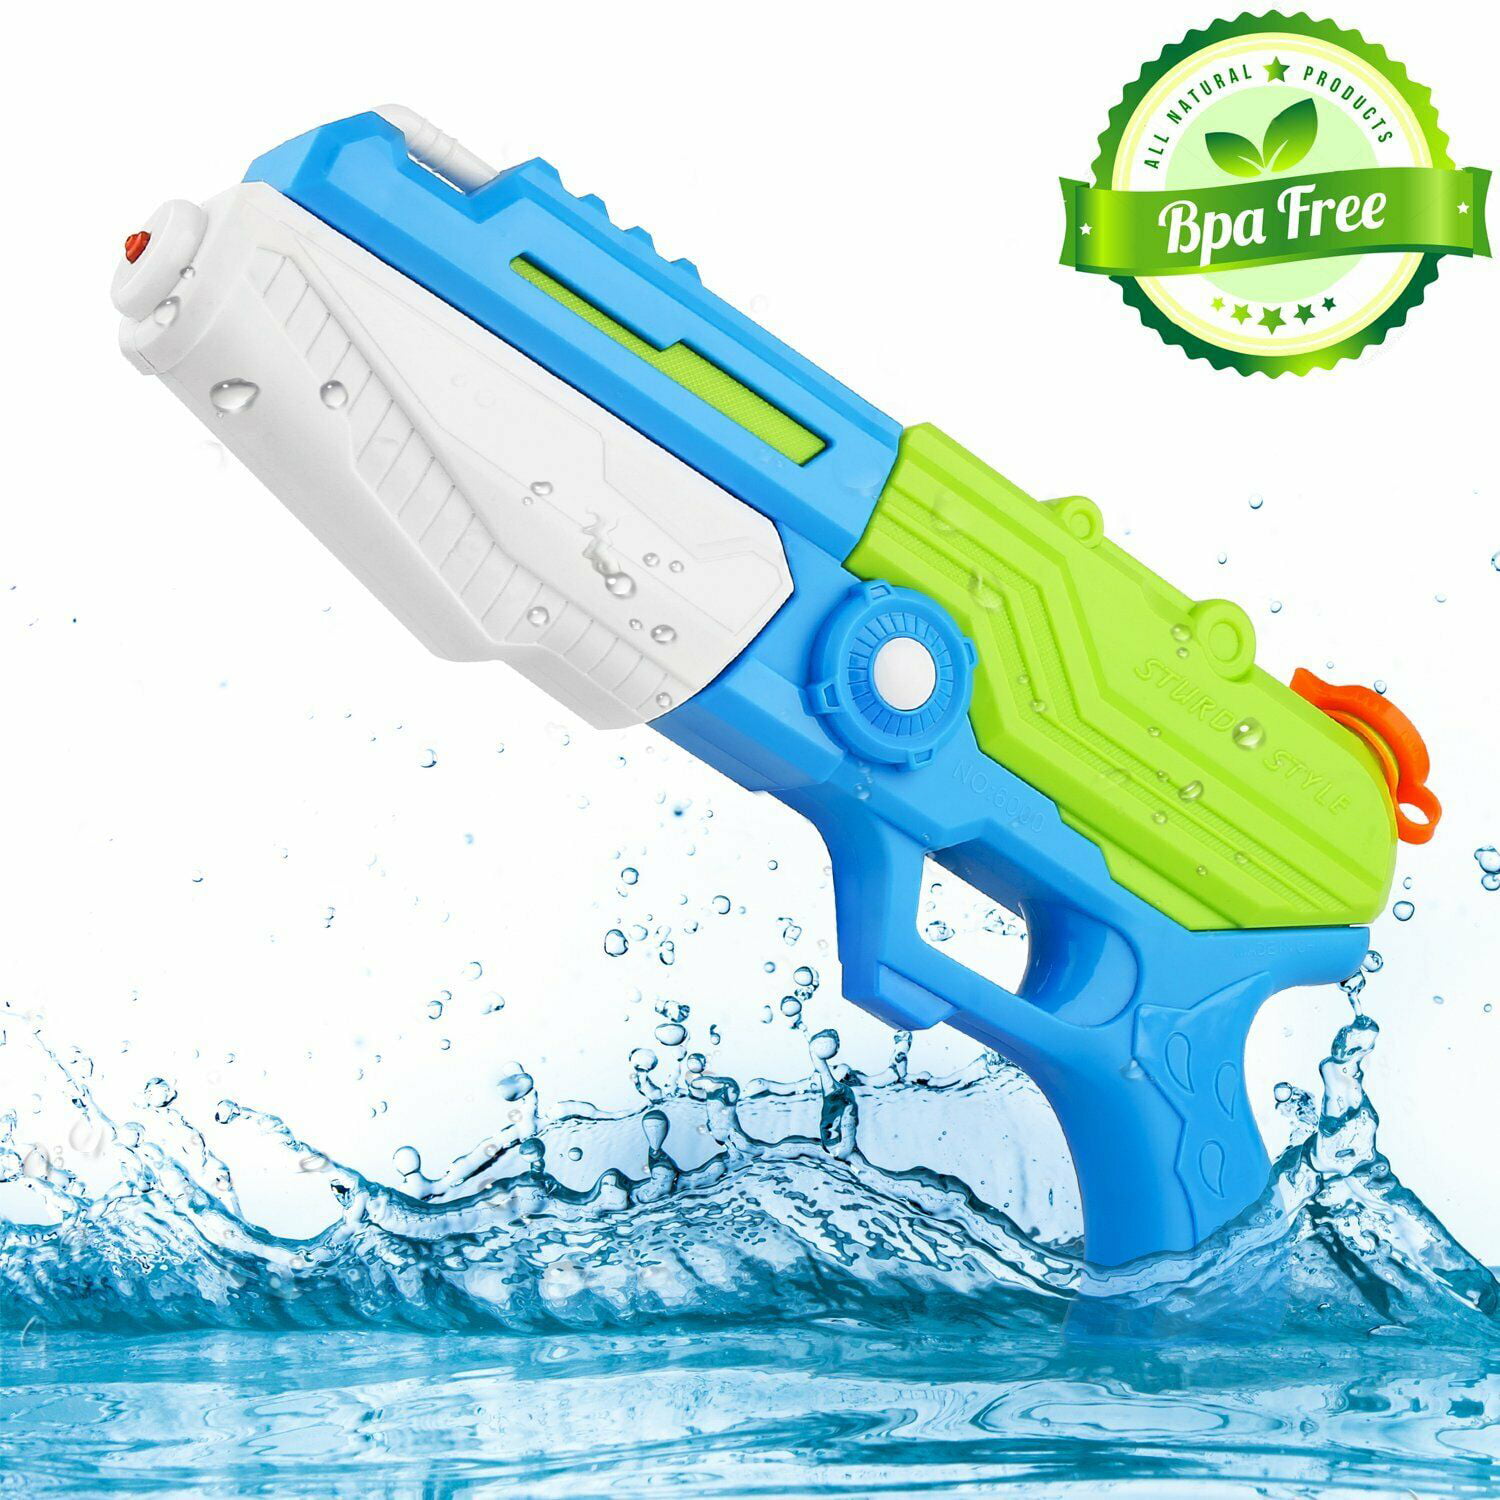 Details about   Inpher Water Guns Shooter for Kids,4Pcs Foam Soakers Blaster Squirt Guns... 